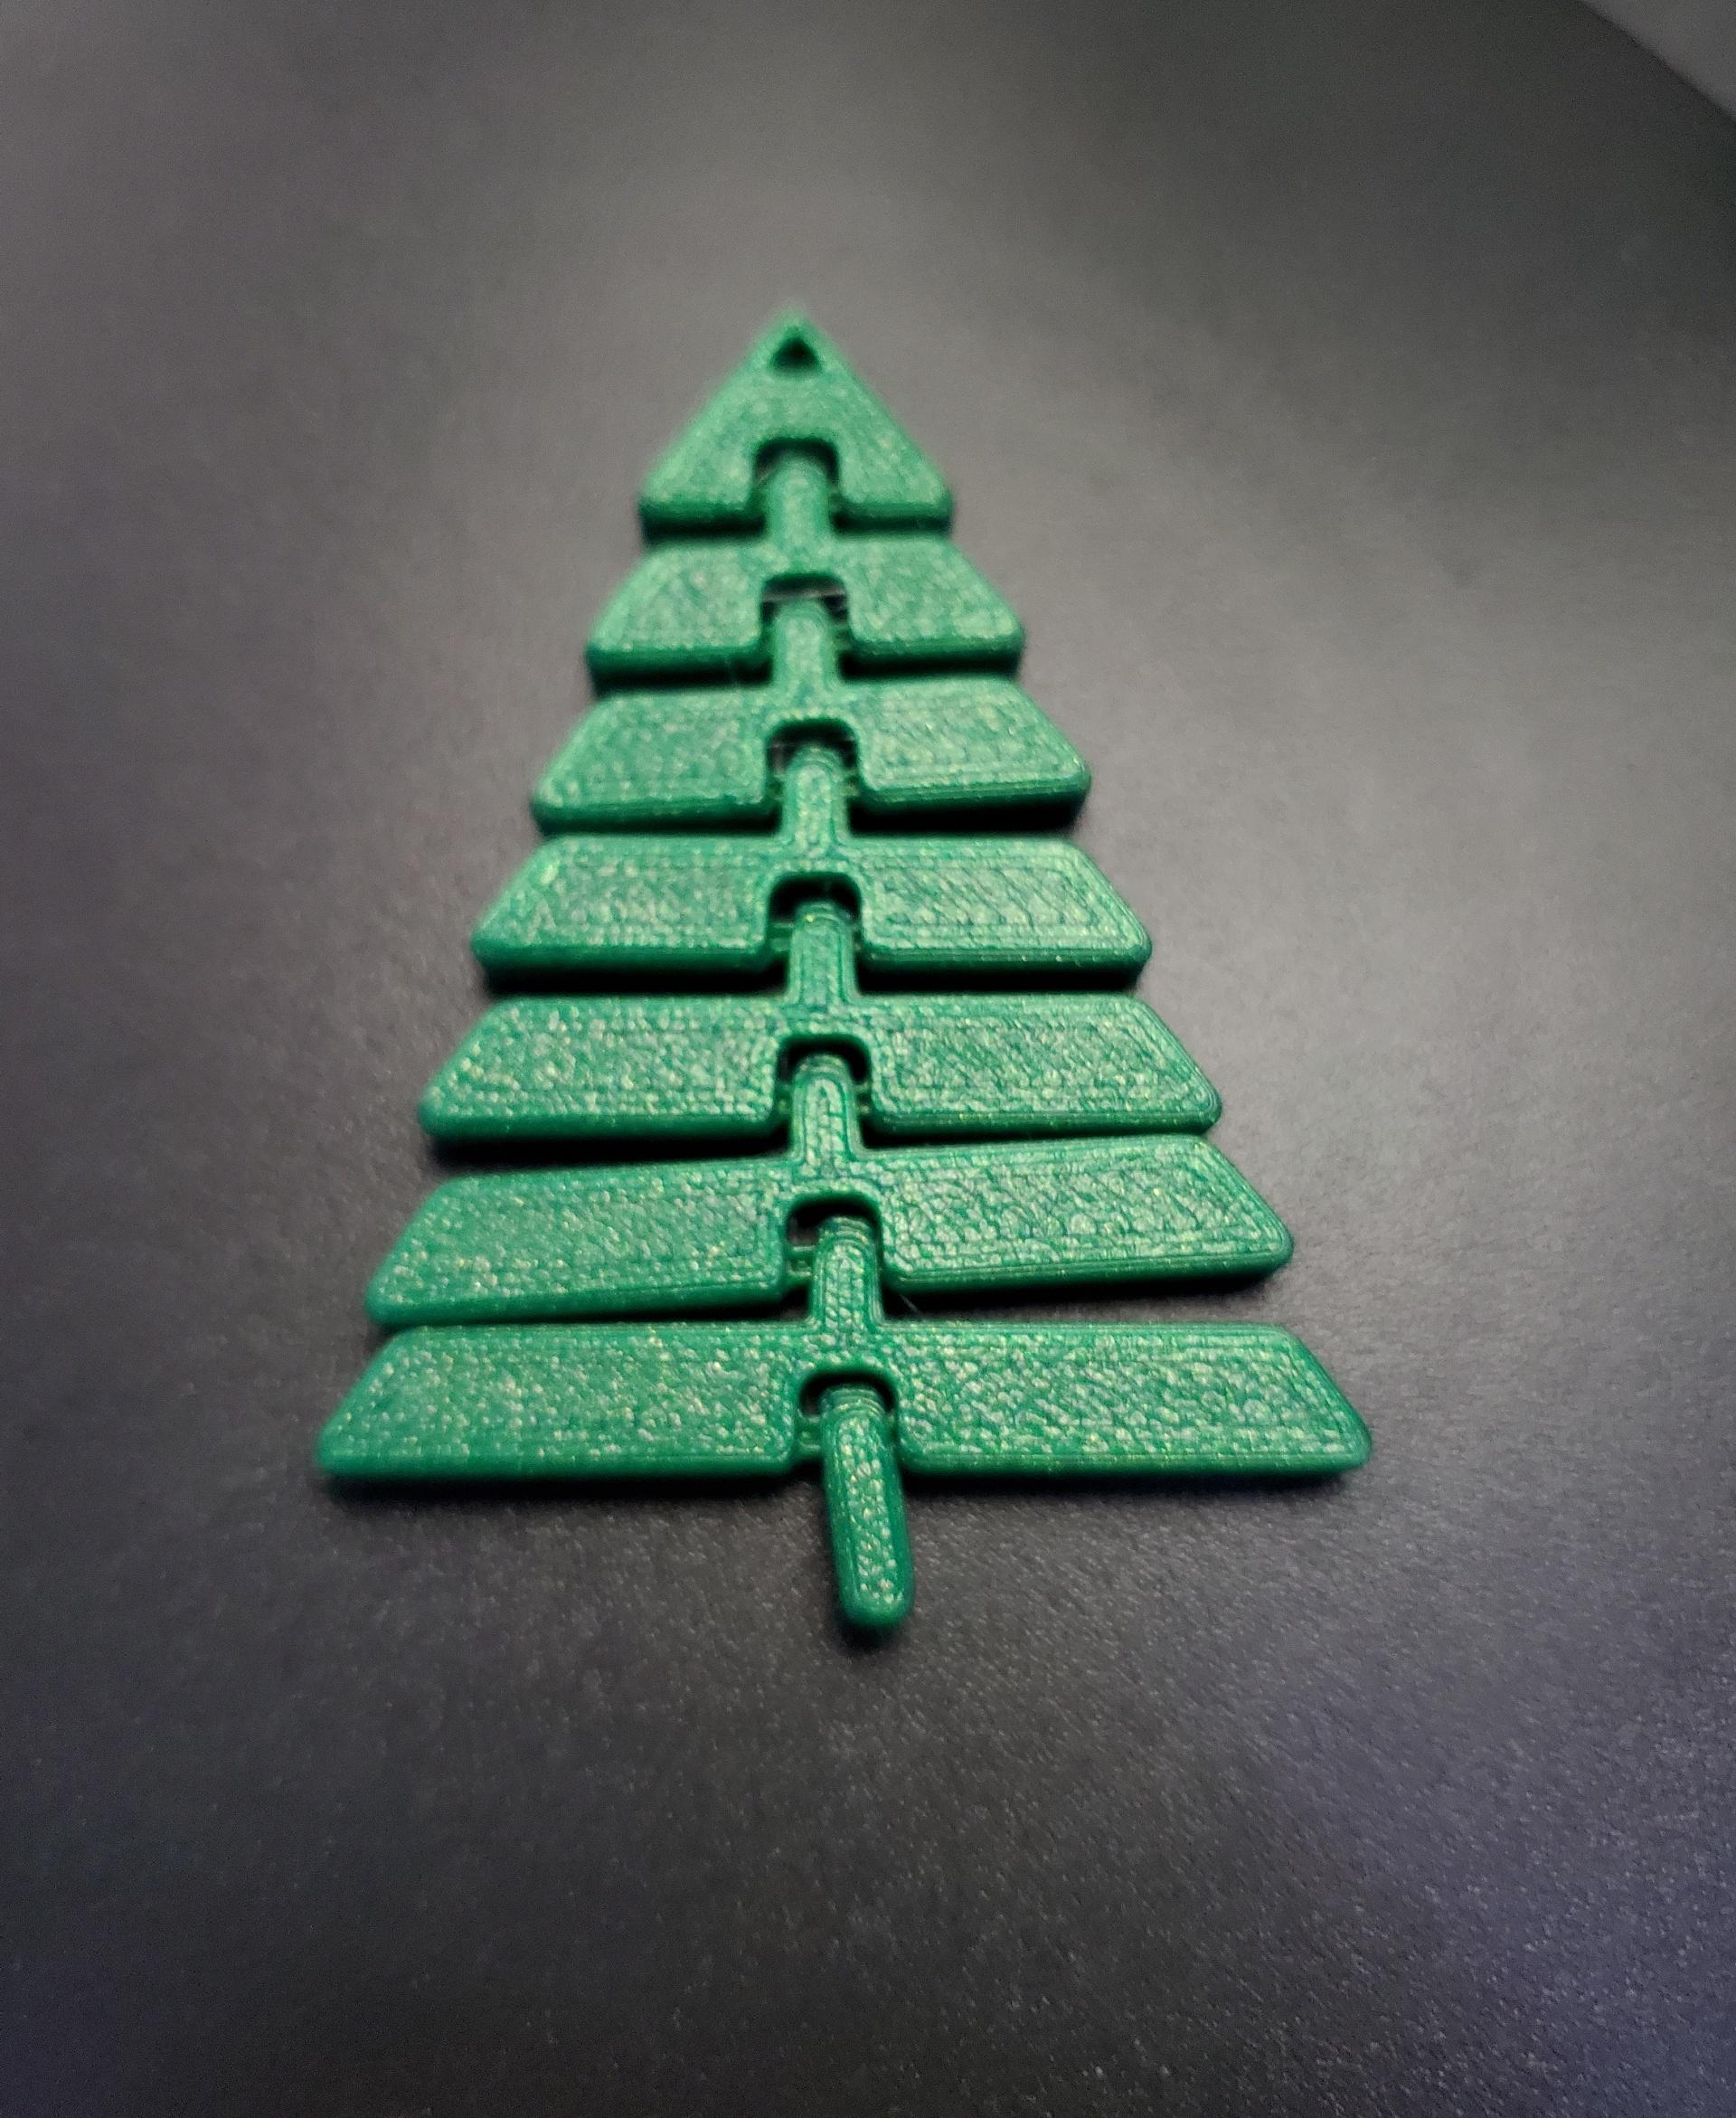 Articulated Christmas Tree Keychain - Print in place fidget toy - protopasta cloverfield metallic green - 3d model